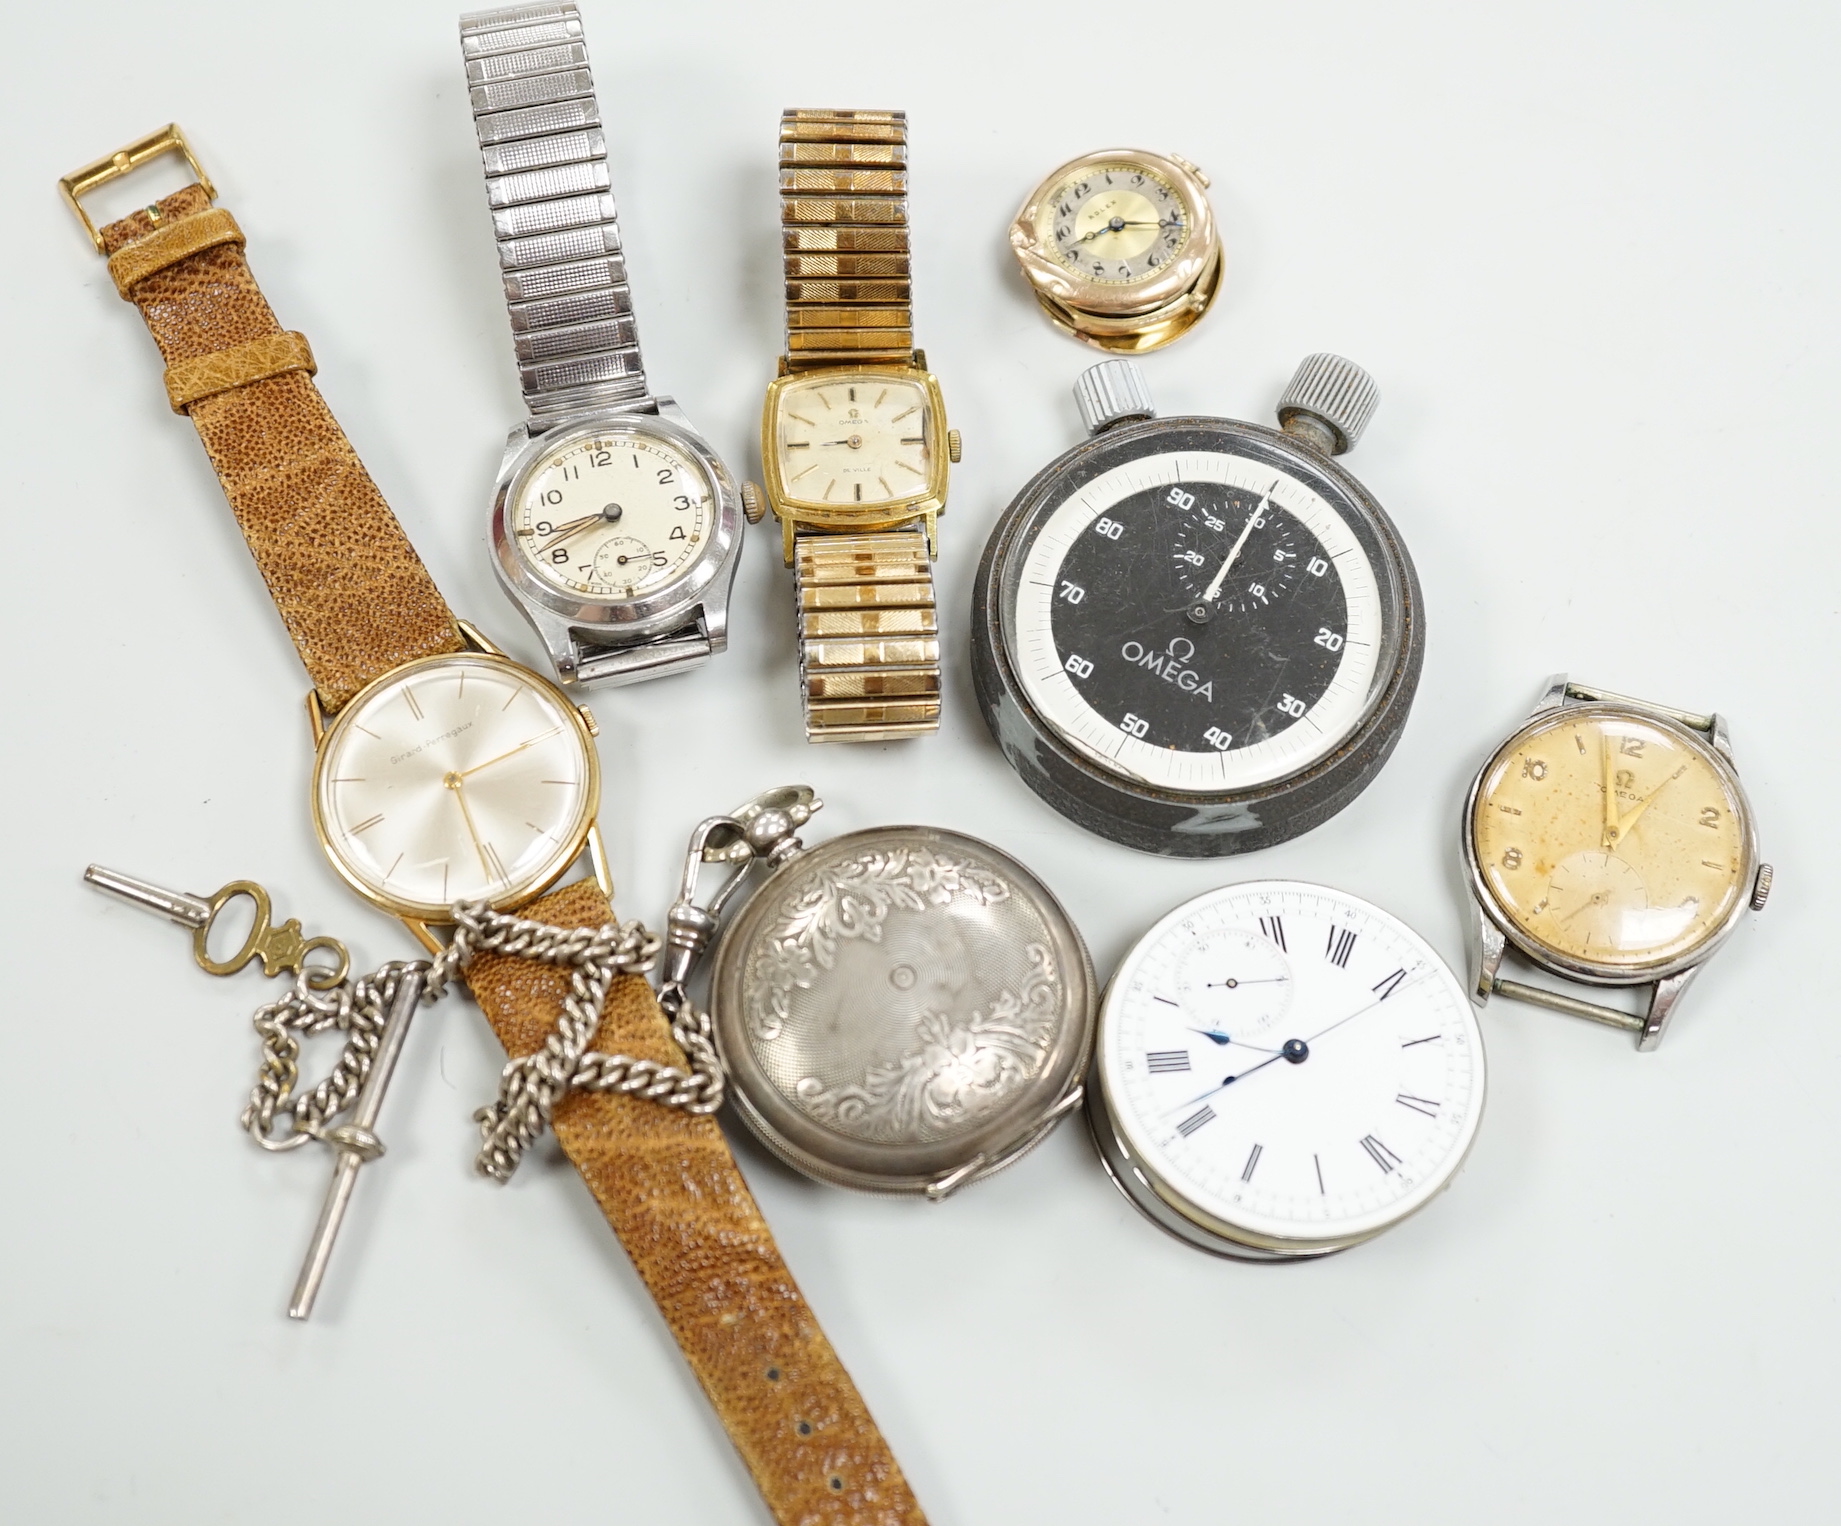 A lady's 9ct Rolex watch (a.f.), a stainless steel Enicar military watch, a gentleman's stainless steel Omega manual wind wrist watch, cased diameter 35mm, five other watches or movements and an Omega stop watch.